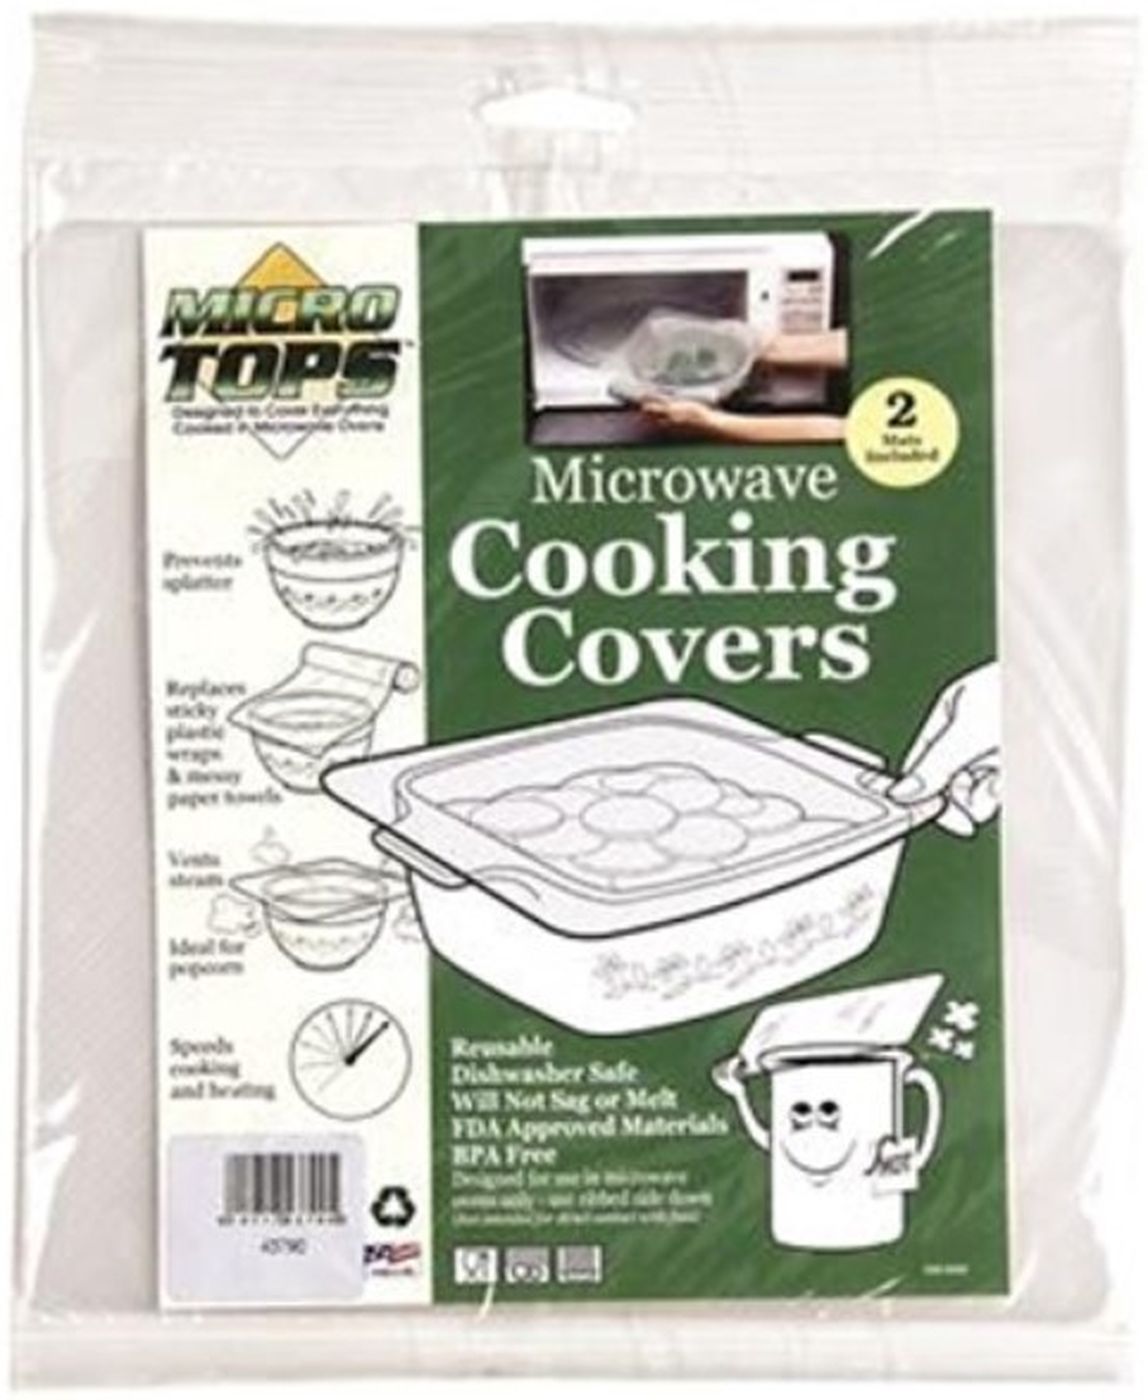 MICROWAVE COOKING COVERS